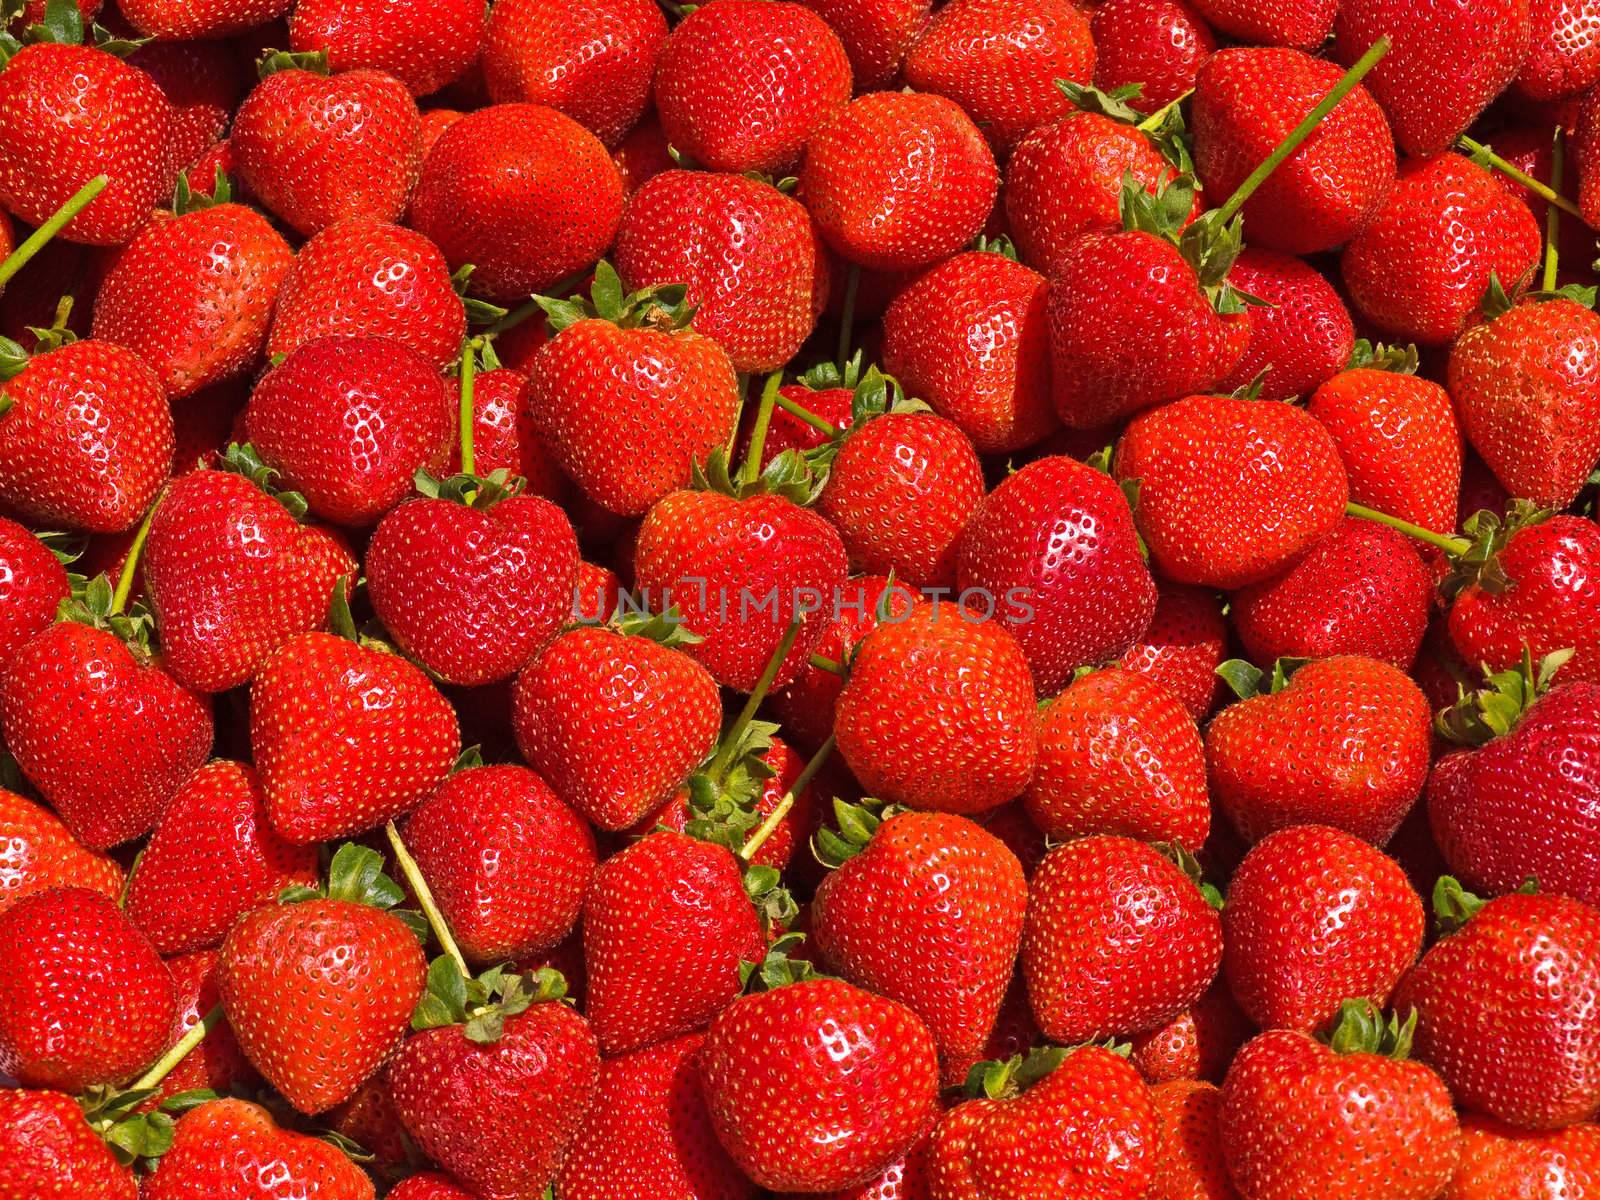 Ripe Red Strawberries at a Farmers Market